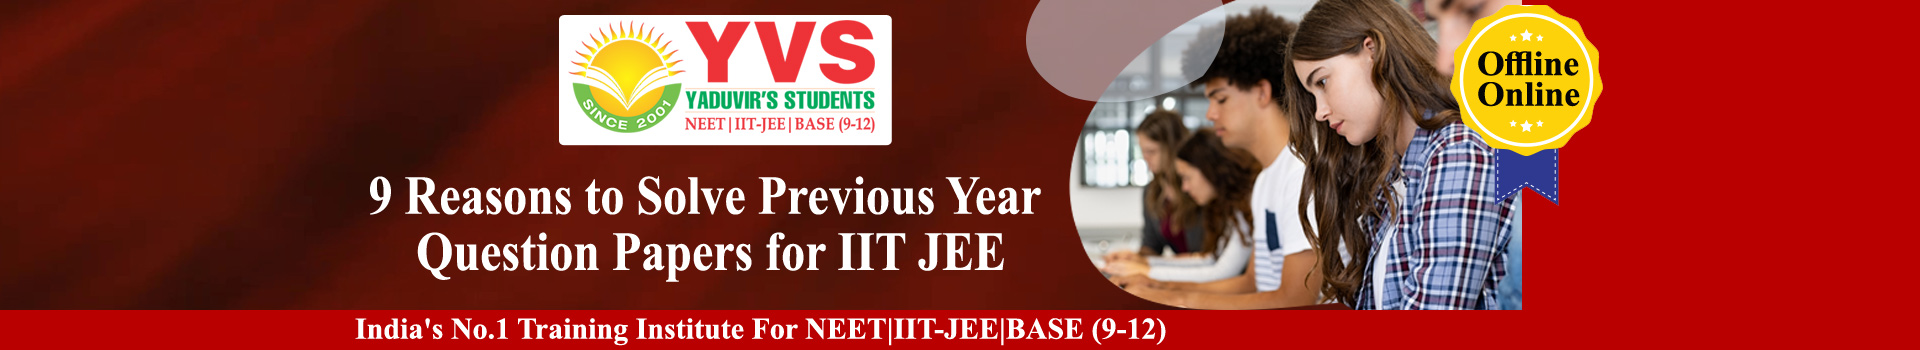 9 Reasons to Solve Previous Year Question Papers for IIT JEE